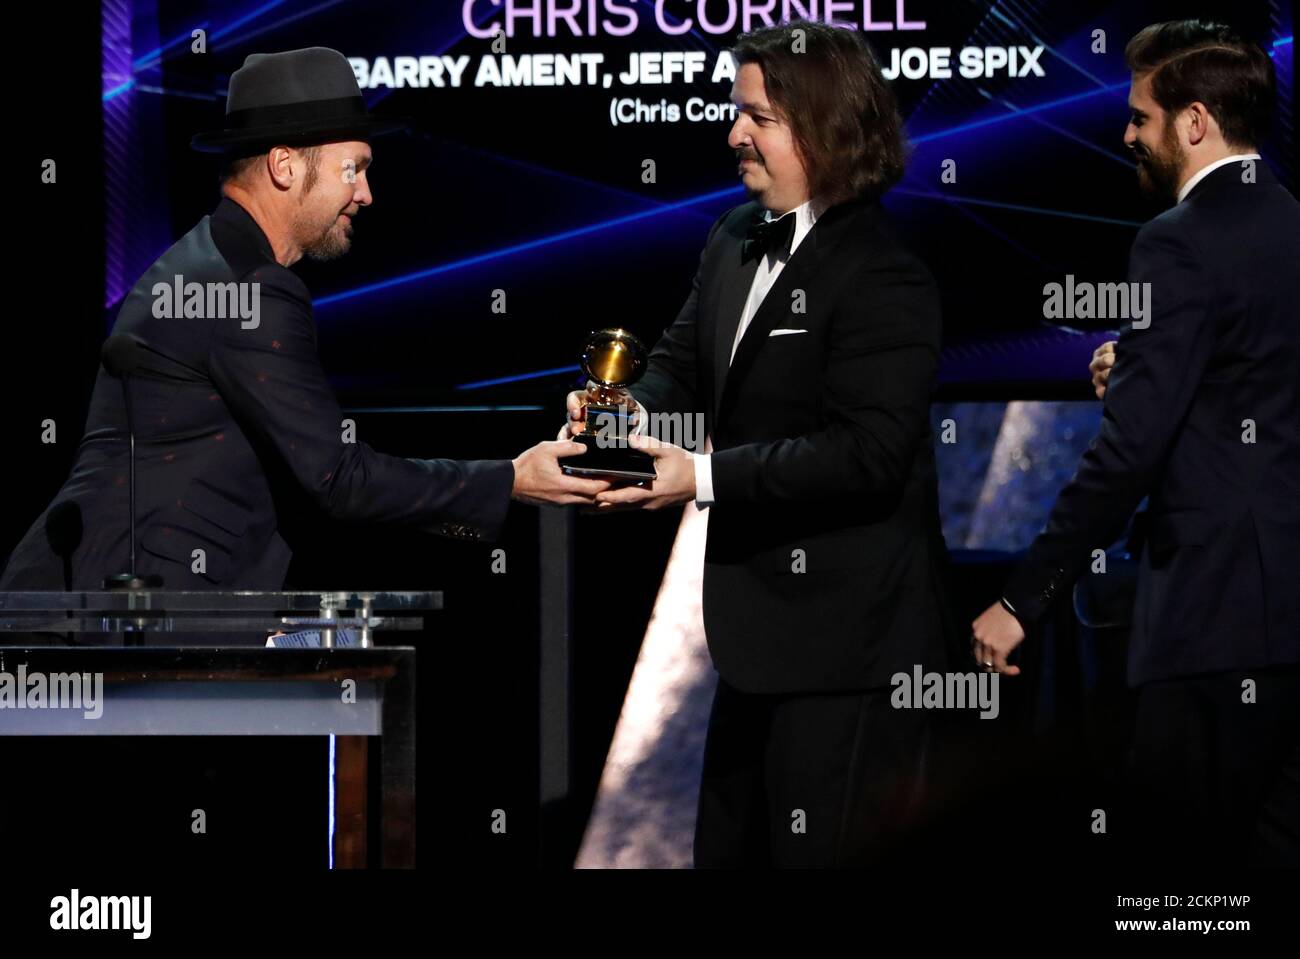 62nd Grammy Awards - Show - Los Angeles, California, U.S., January 26, 2020 - Barry Ament, Jeff Ament and Joe Spix accept the award for Best Recording Package winner for 'Chris Cornell.' REUTERS/Mario Anzuoni Stock Photo